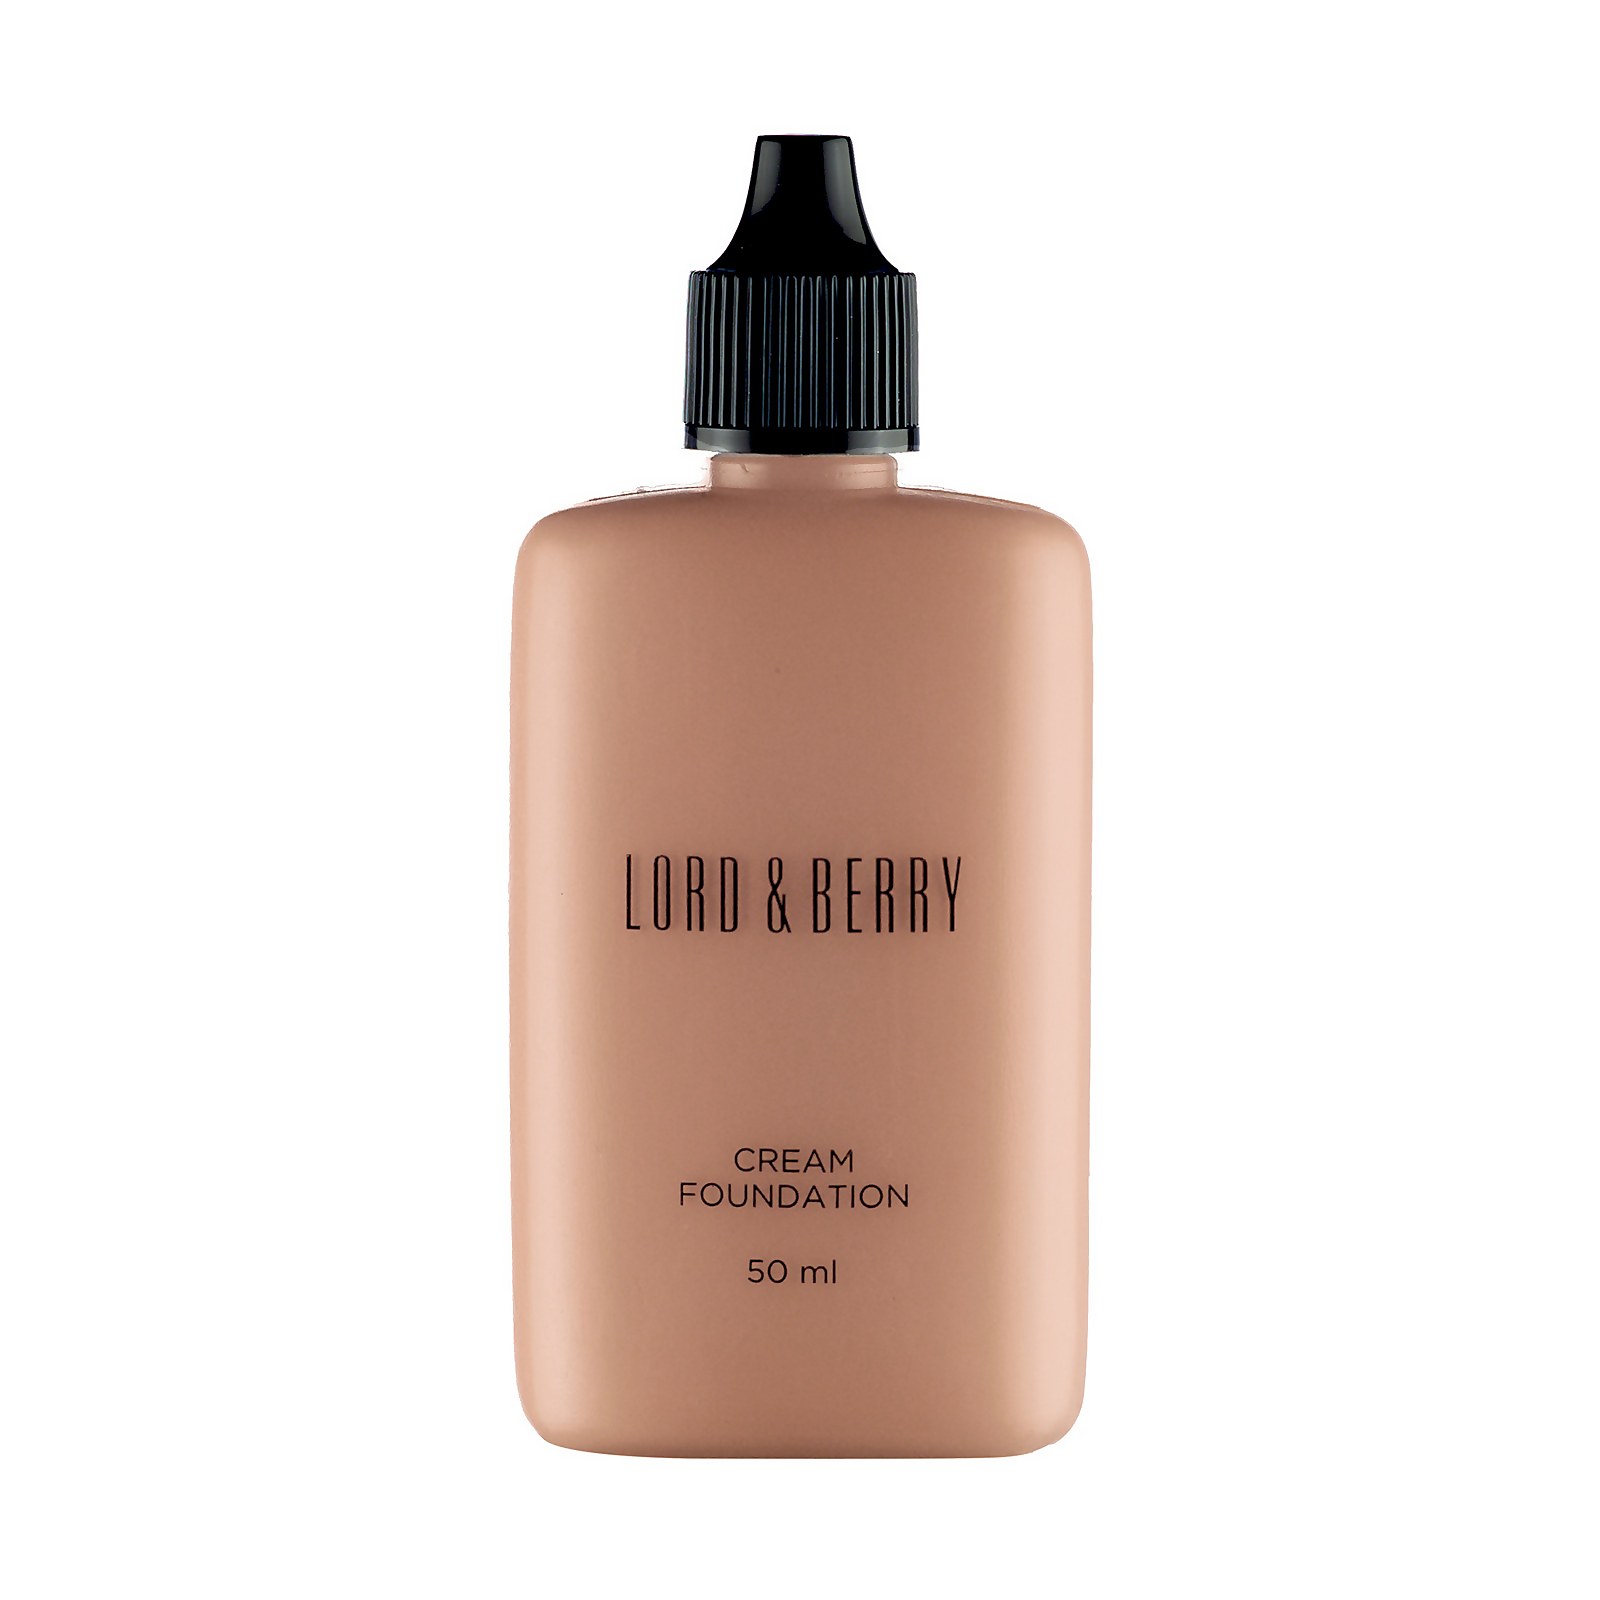 Lord & Berry Cream Foundation 50ml (Various Shades) - Cinnamon von Lord & Berry